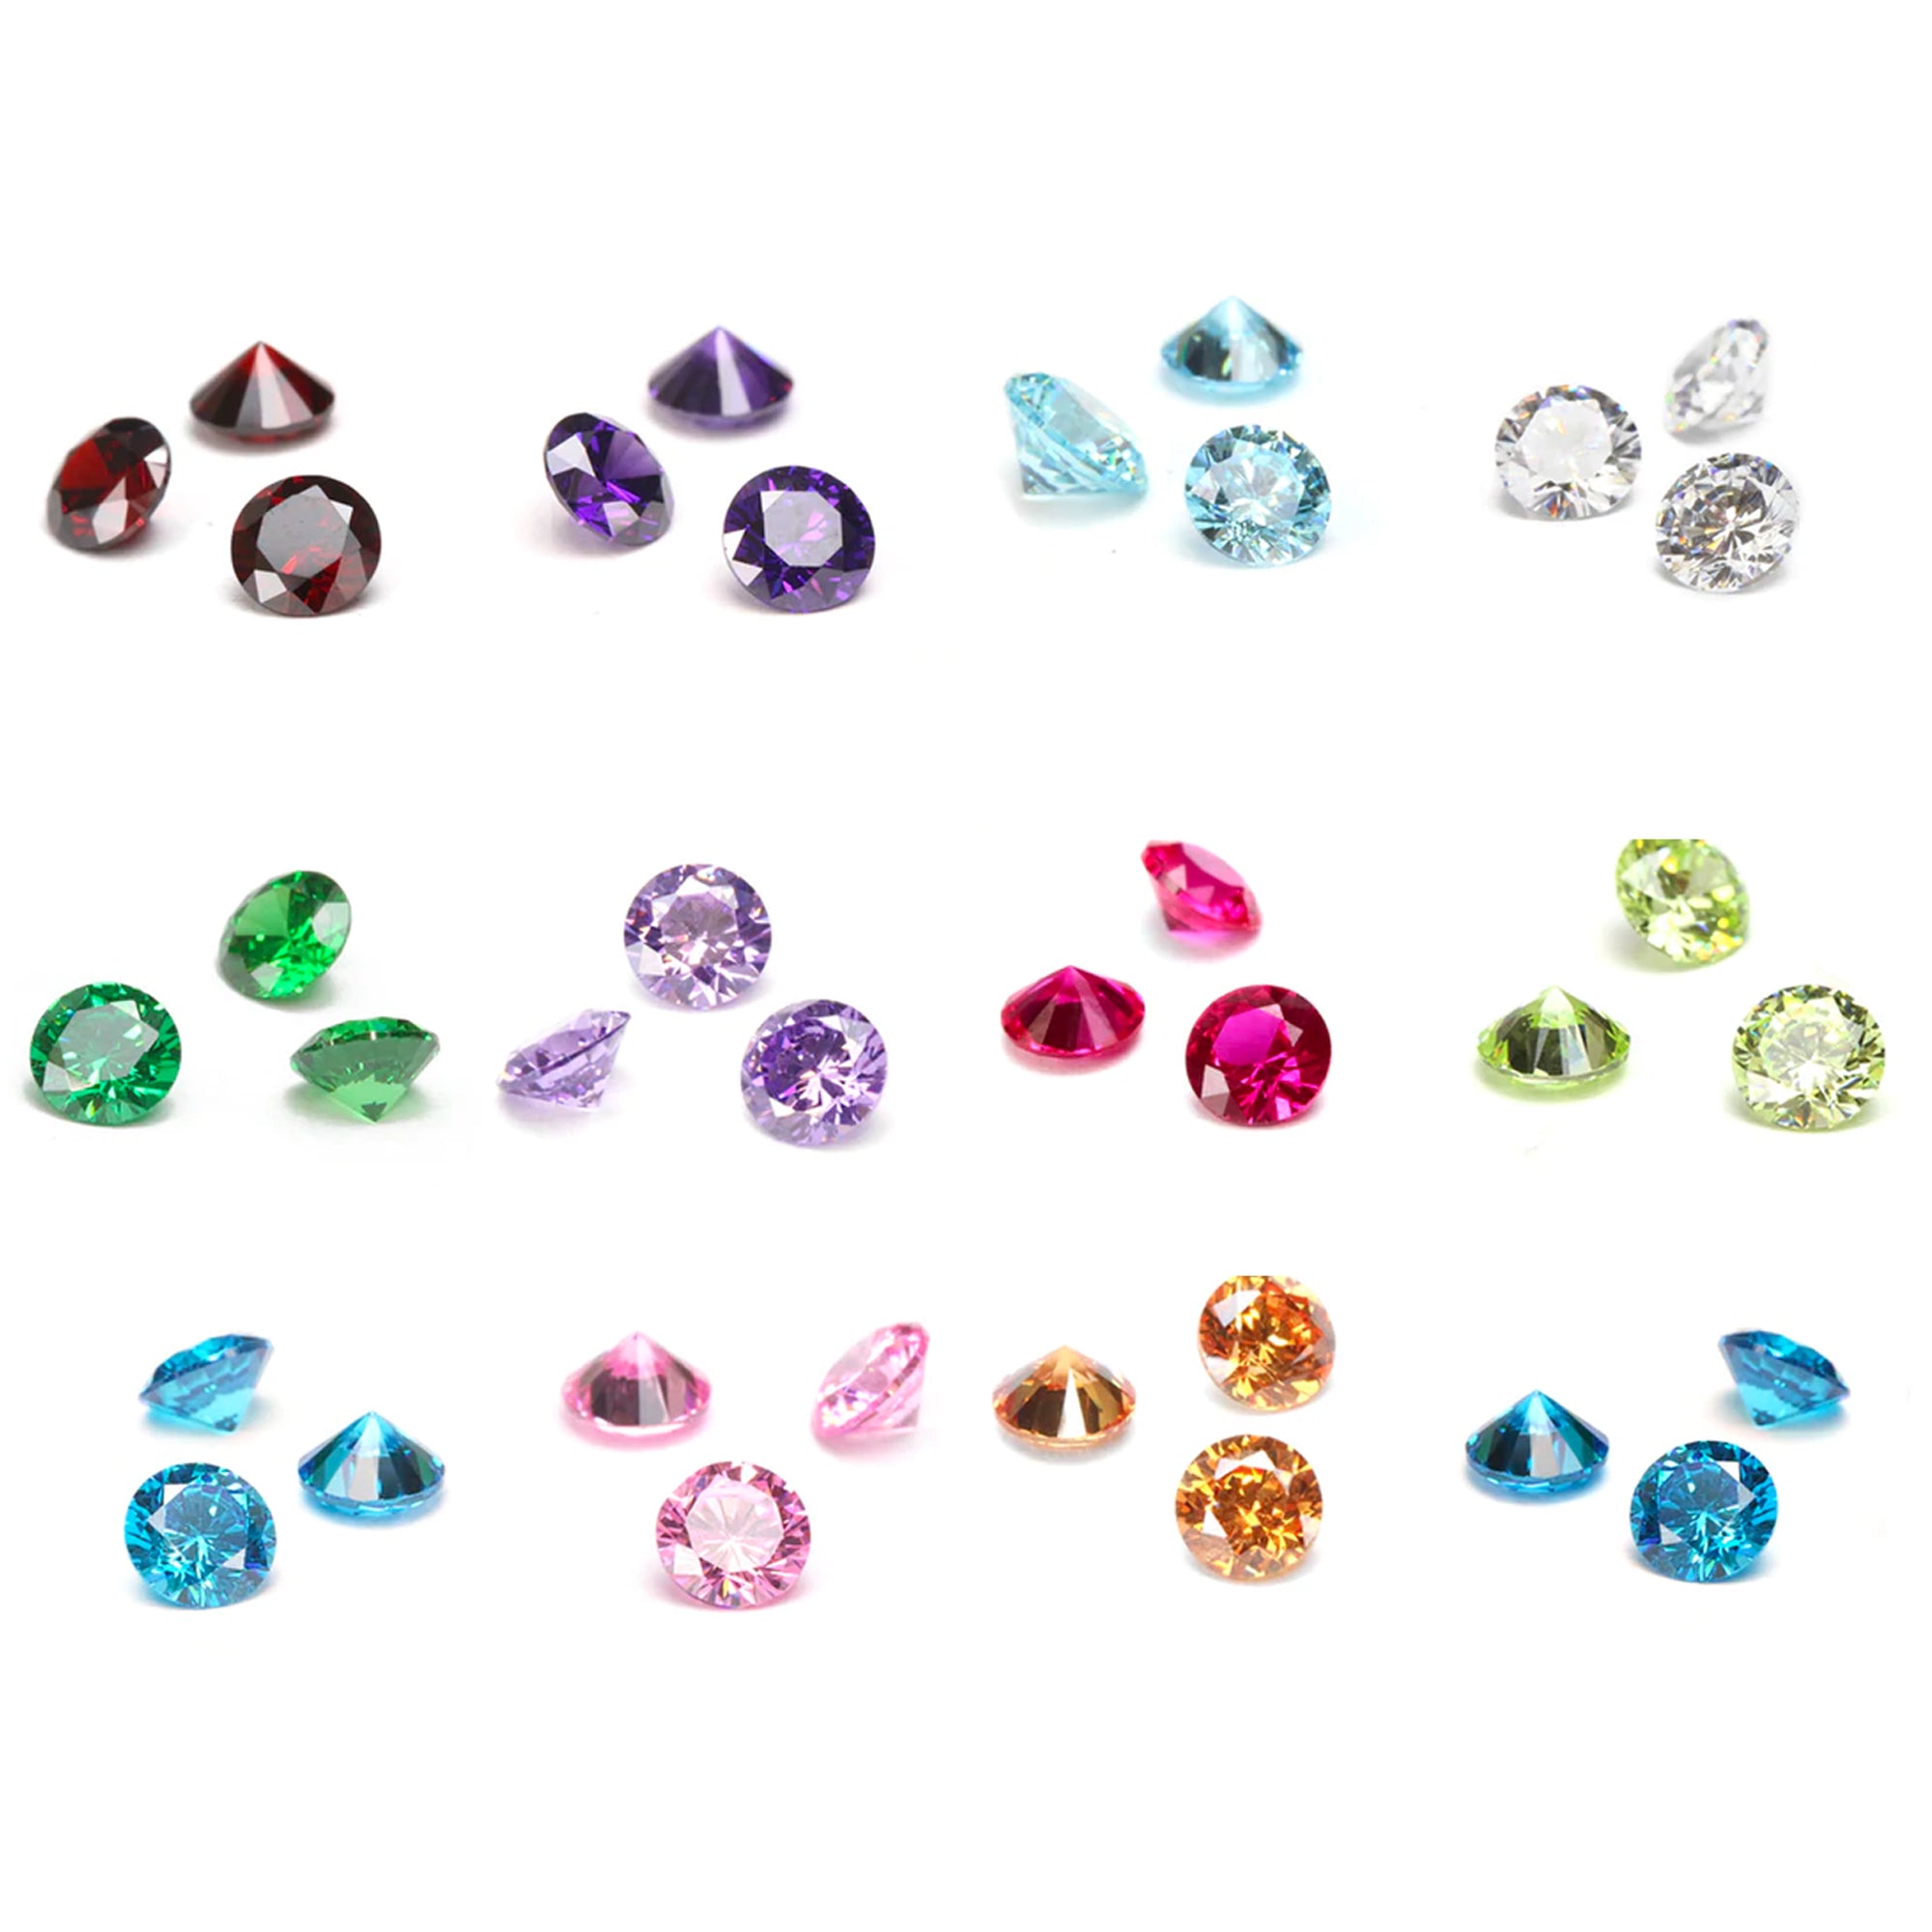 120 Pieces Charms for Jewelry Making Birthstone Charms Earring